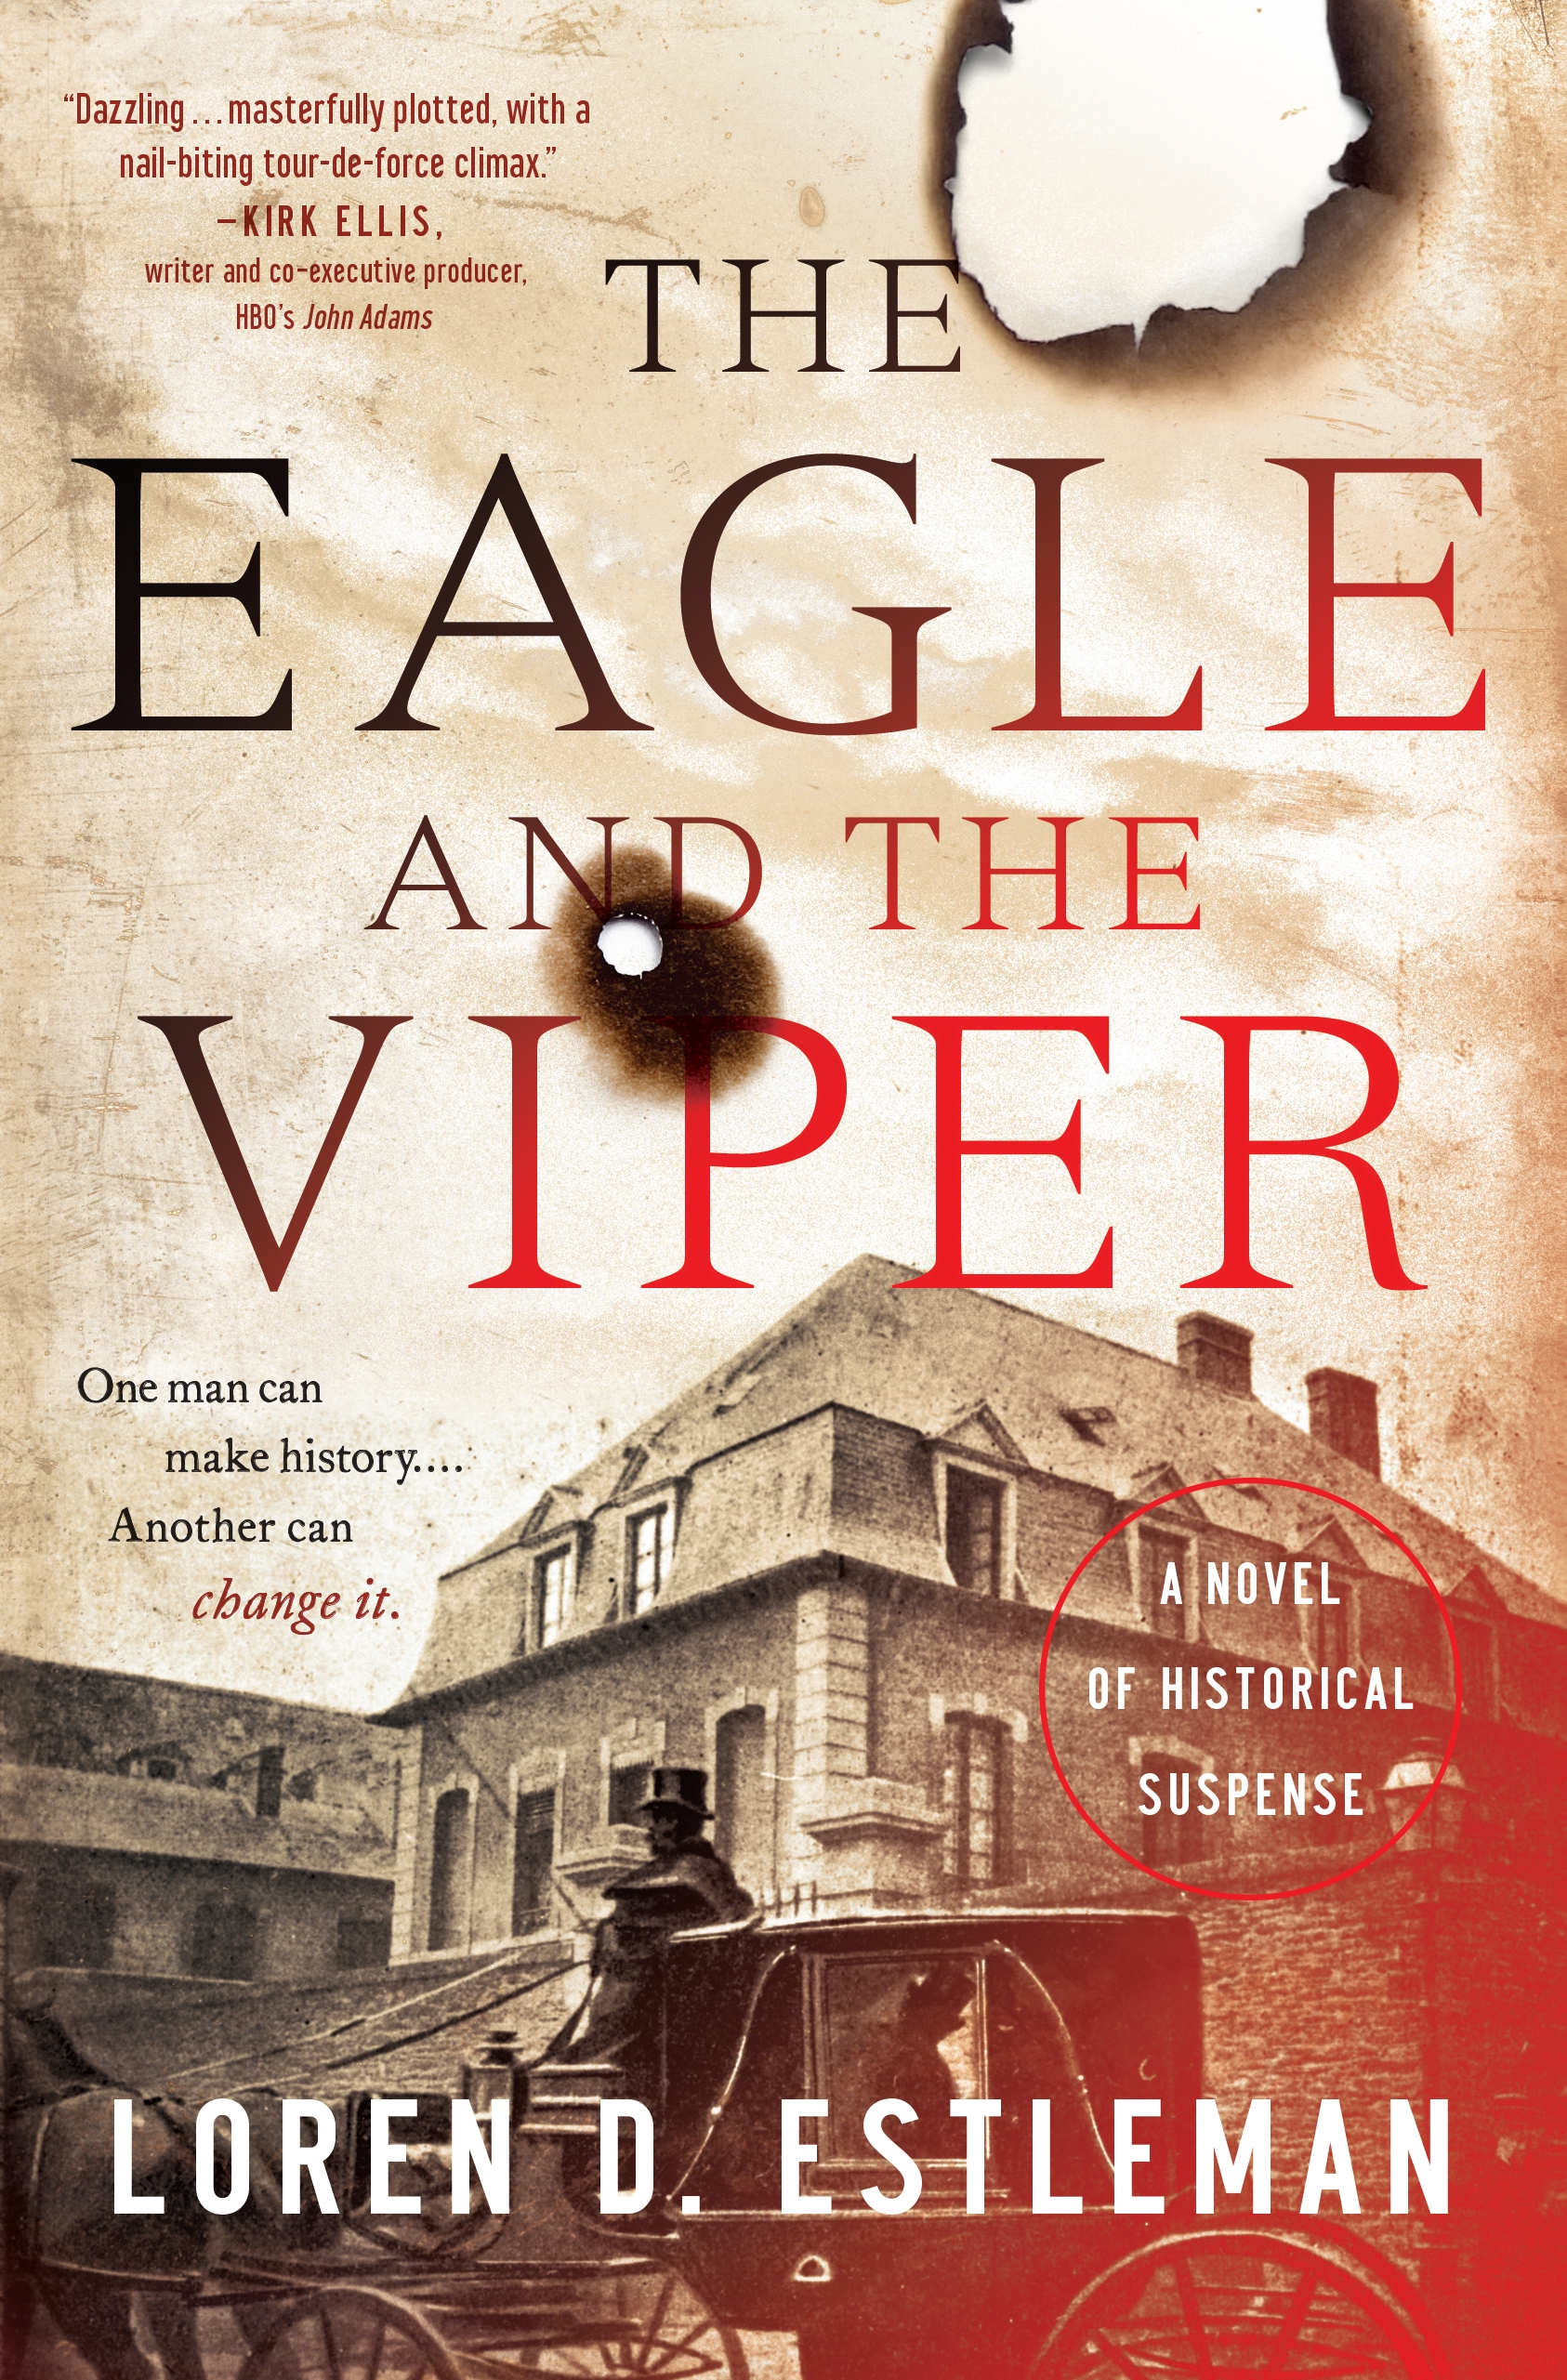 The Eagle and the Viper : A Novel of Historical Suspense by Loren D. Estleman